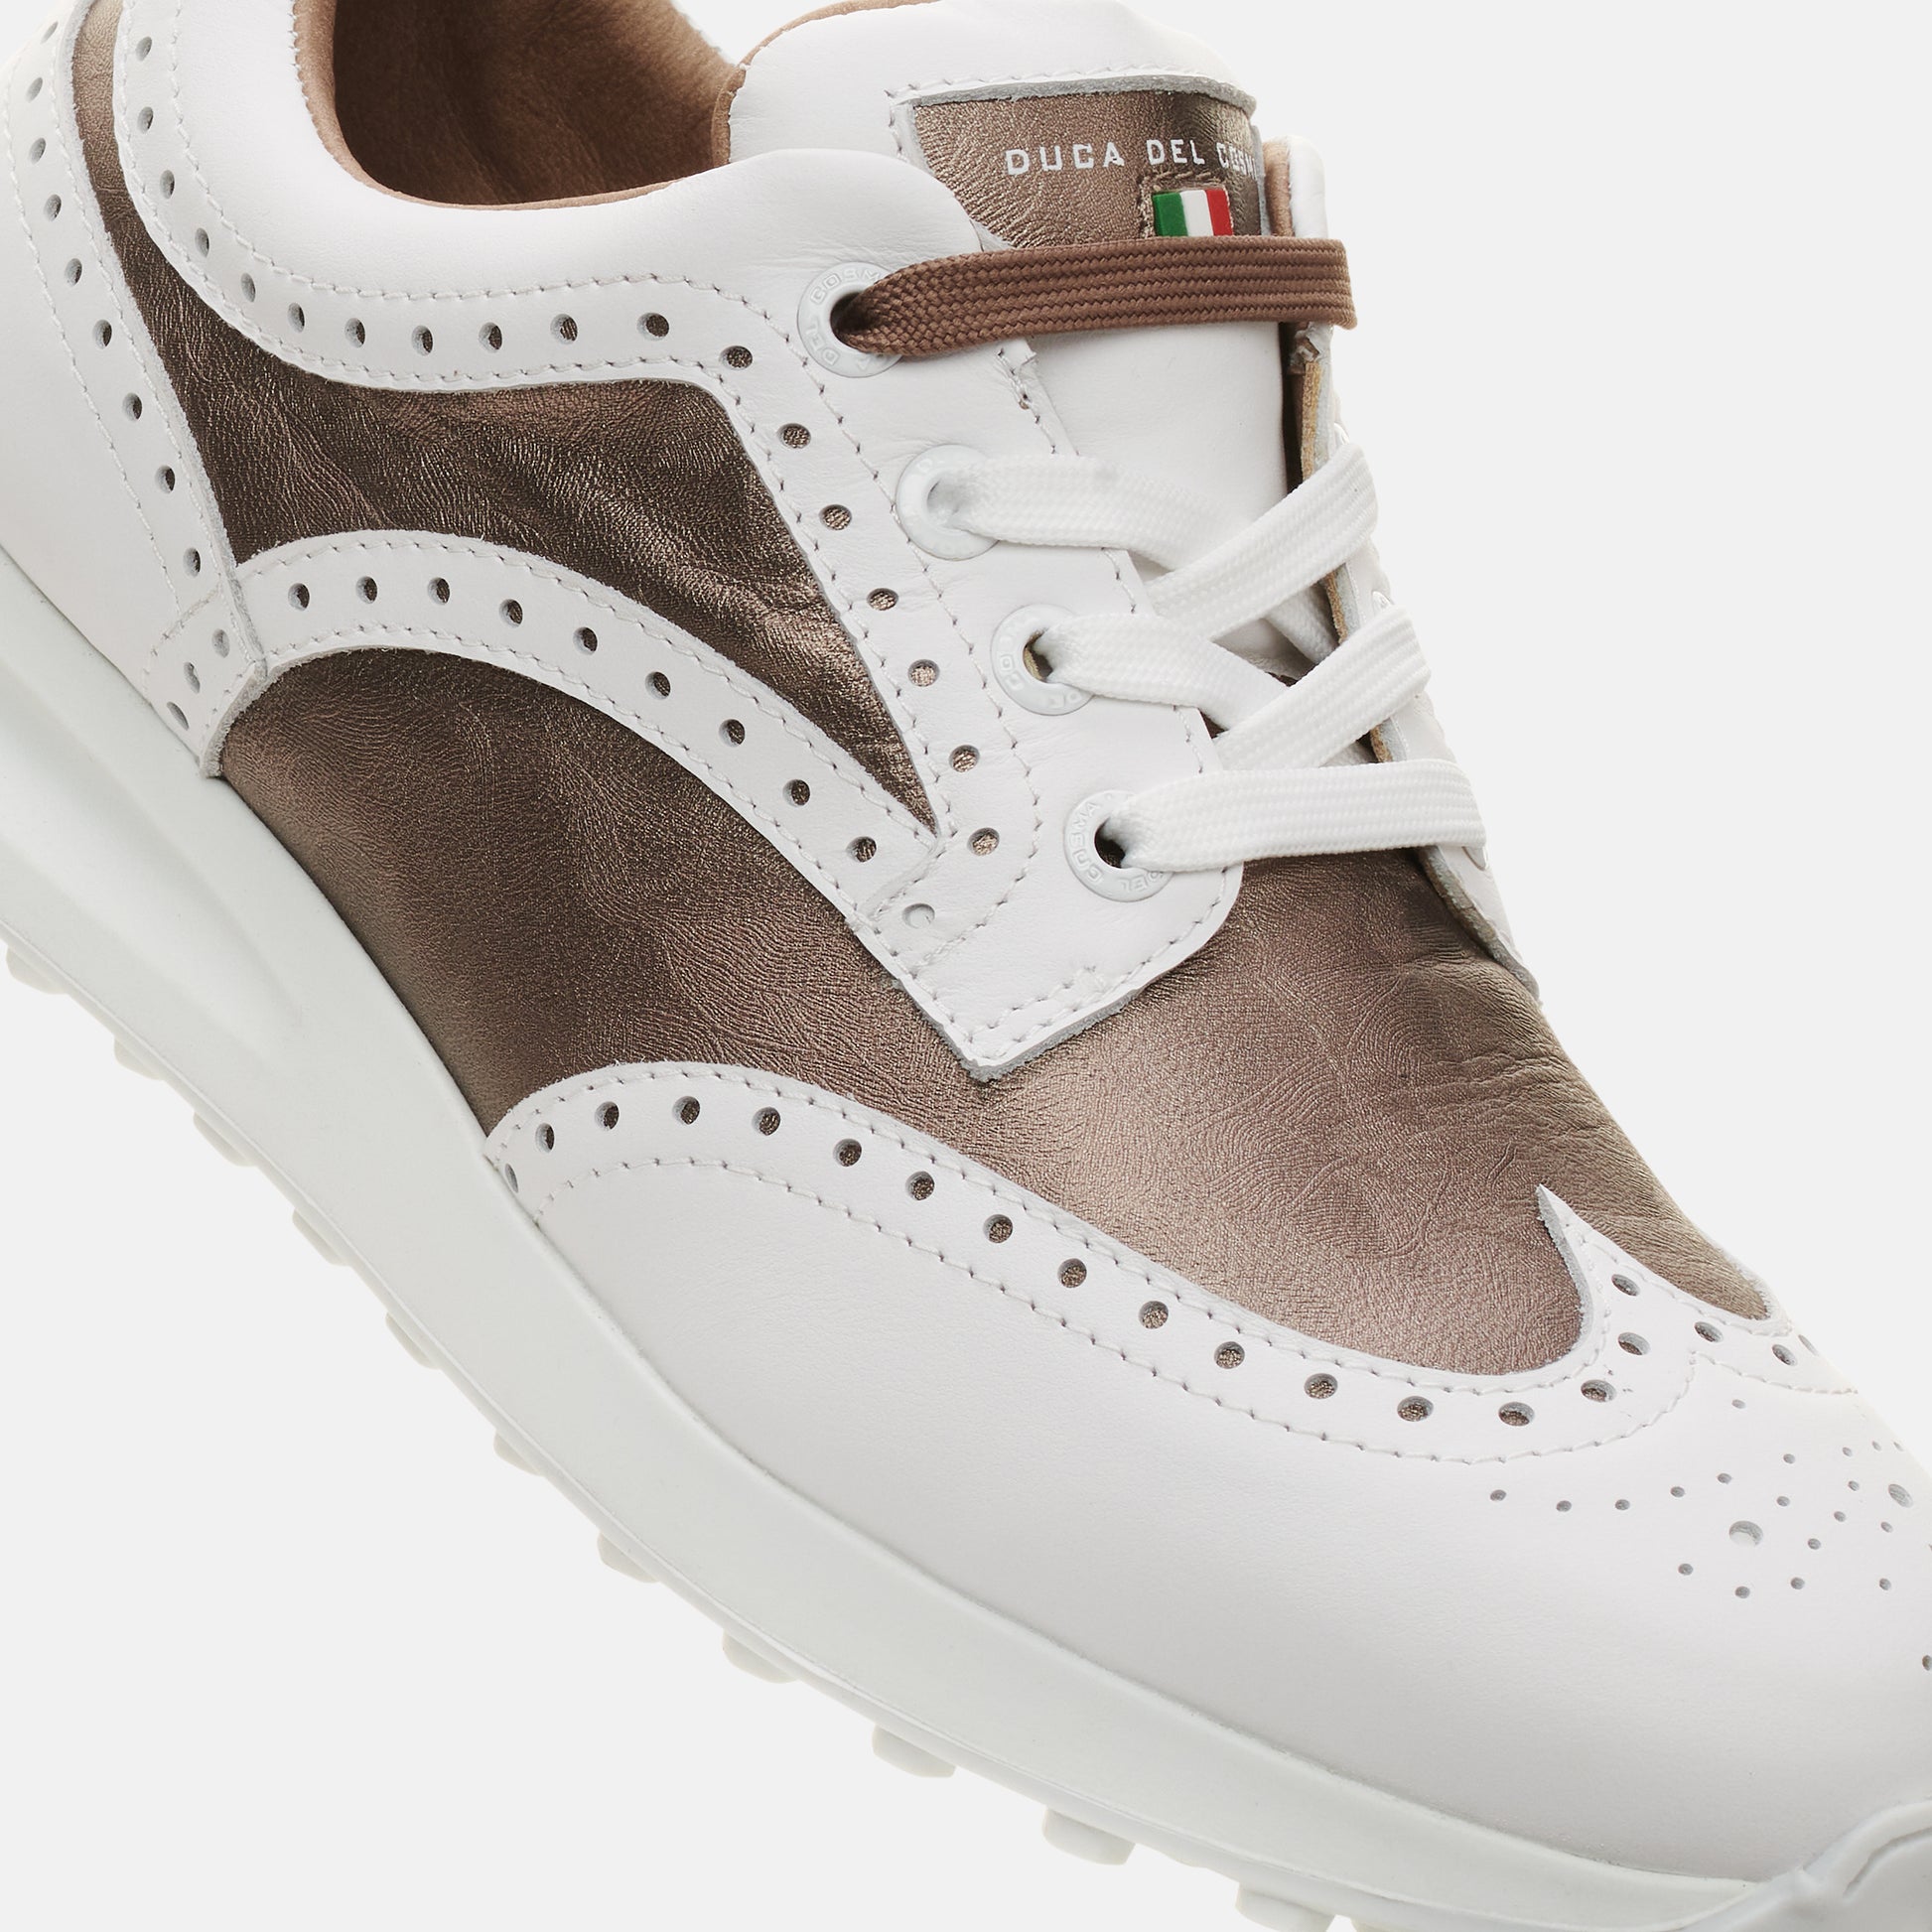 ladies spikeless golf shoes